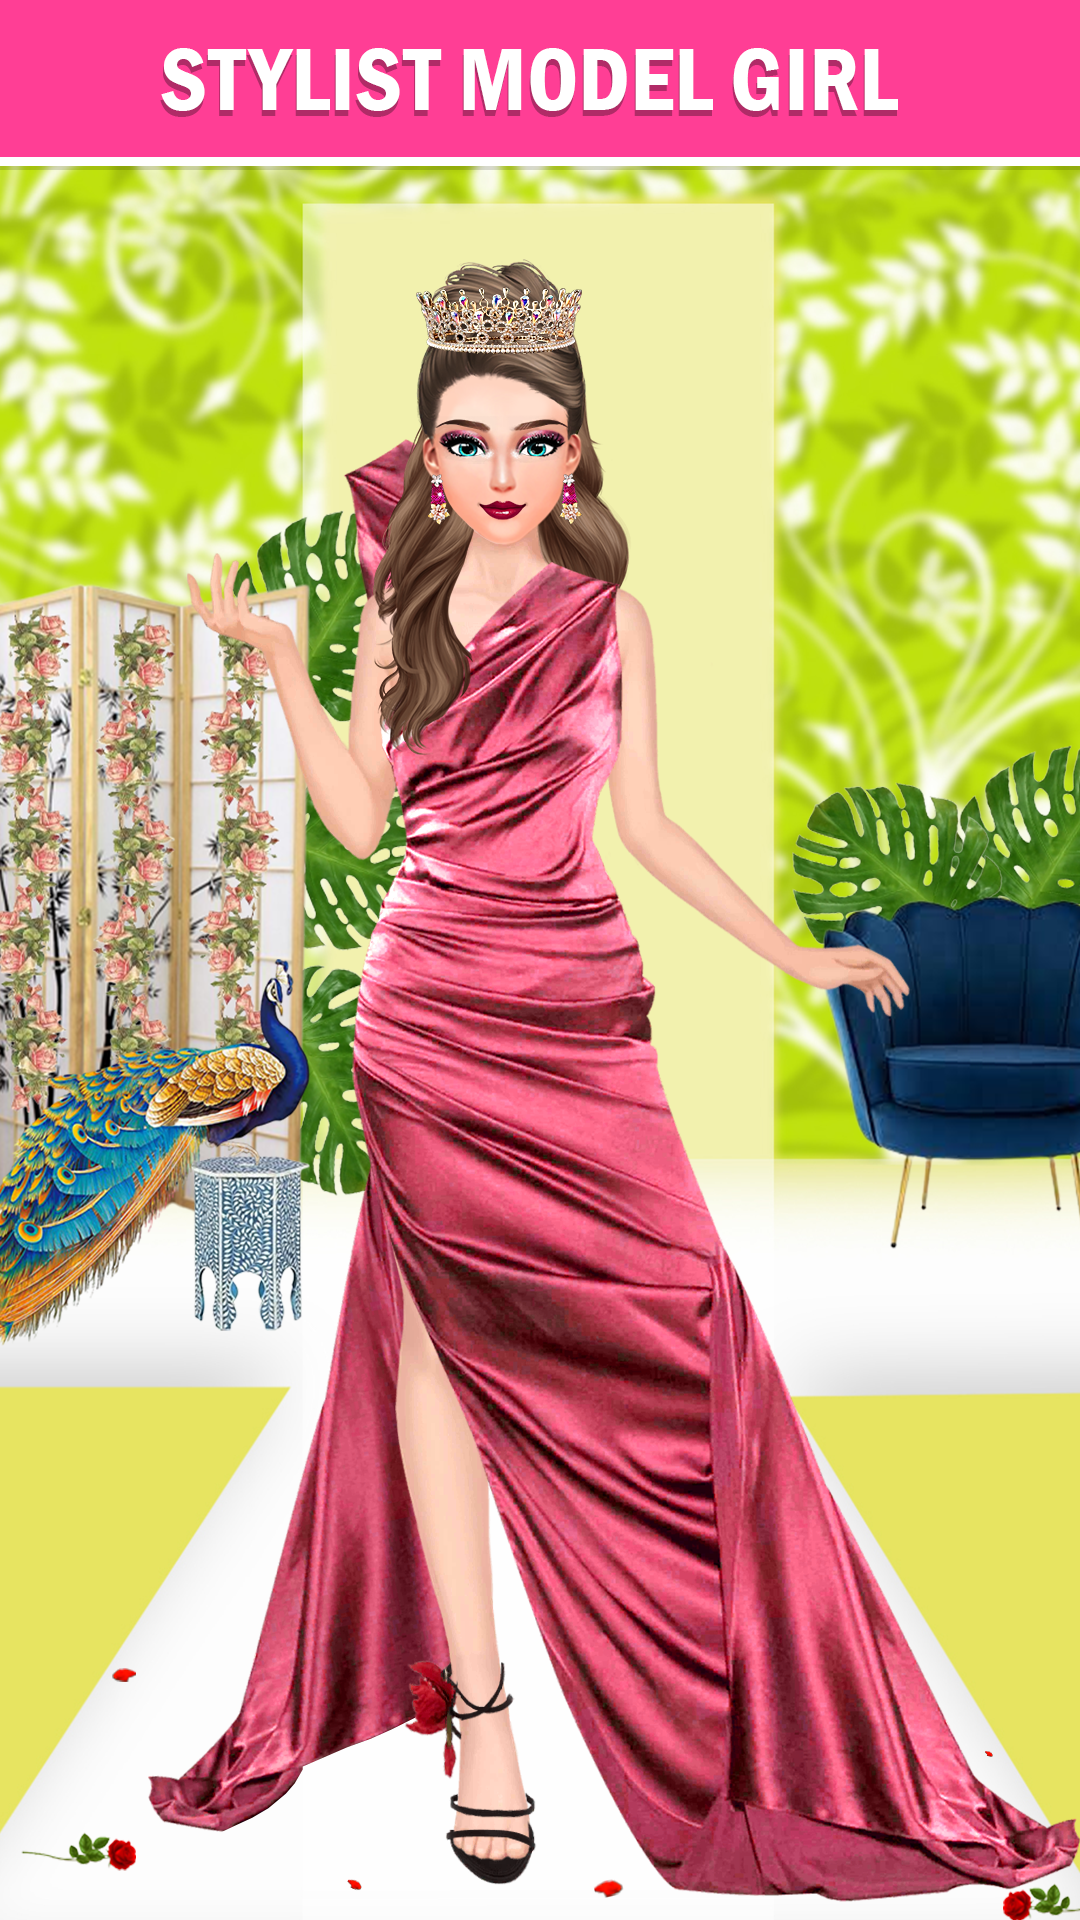 Phaser 3] My Stylish Ball Gown - Princess Dress Up Games - Showcase - Phaser